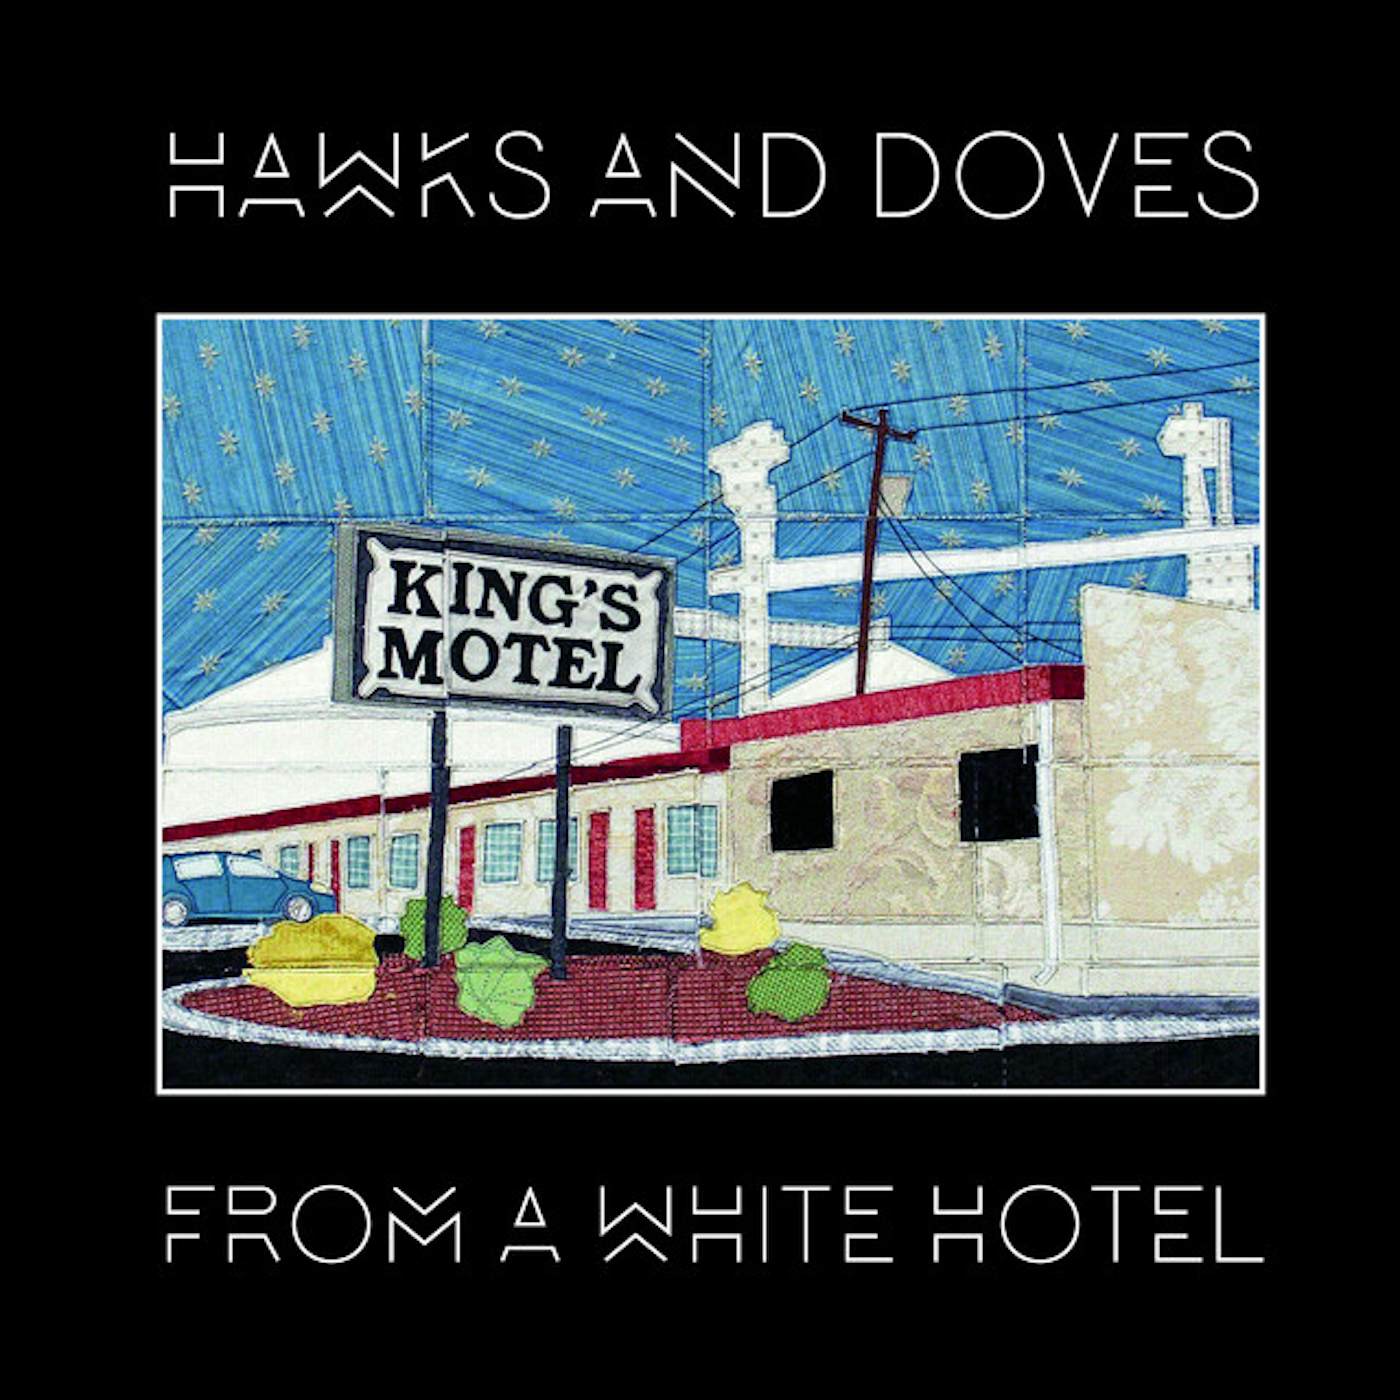 Hawks and Doves From a White Hotel Vinyl Record